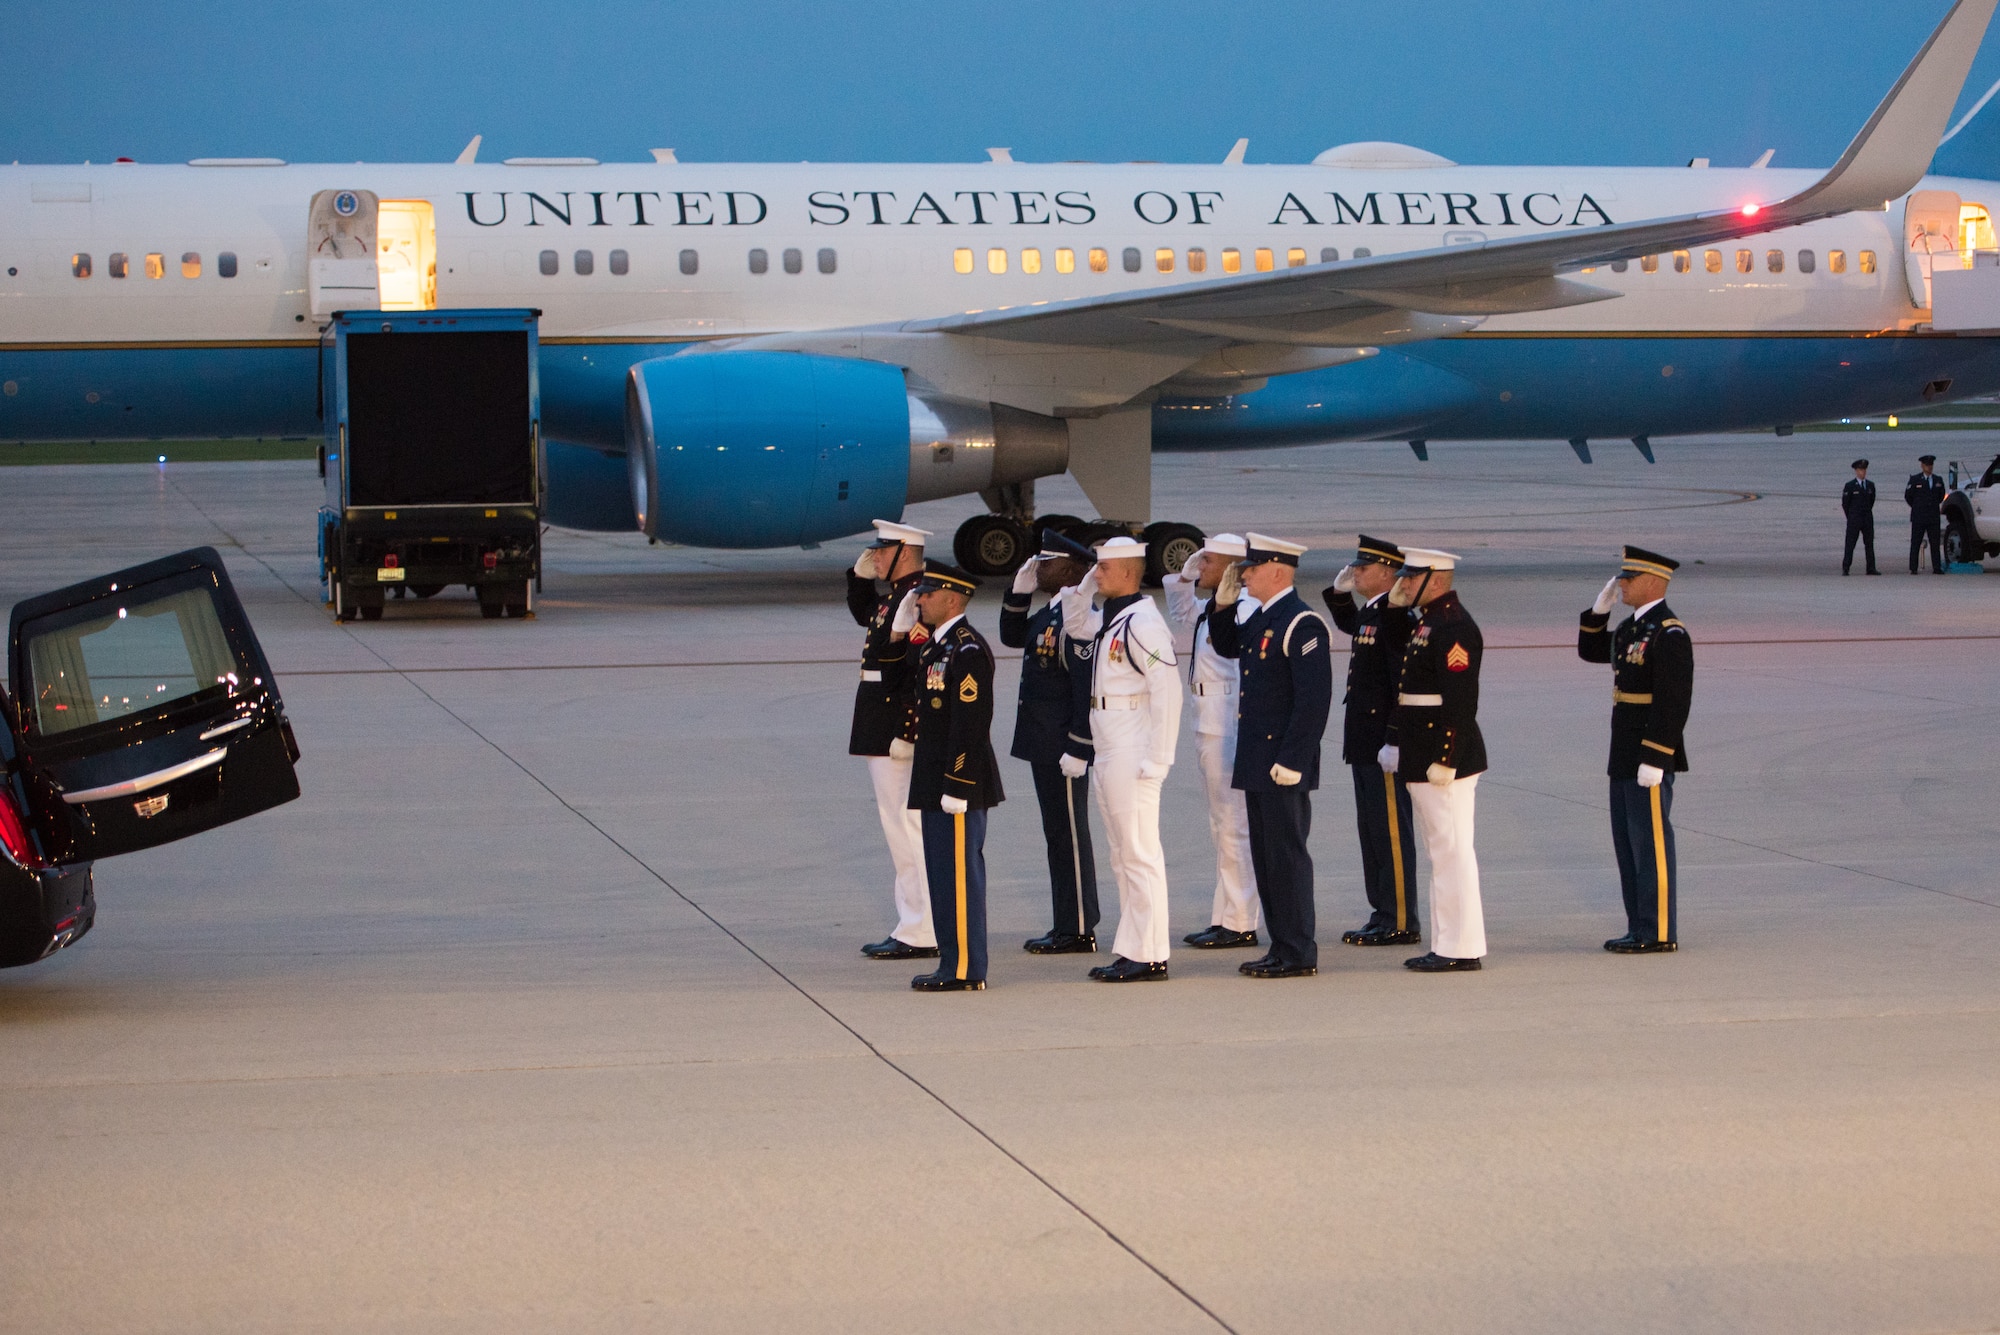 Members of the Joint Service Arrival Team salute the casket of Sen. John McCain following it's arrival at Joint Base Andrews, Md., Aug. 30, 2018. The former senator’s remains are en route to lie in state in the U.S. Capitol Rotunda. (U.S. Air Force photo by Airman 1st Class Jalene Brooks)